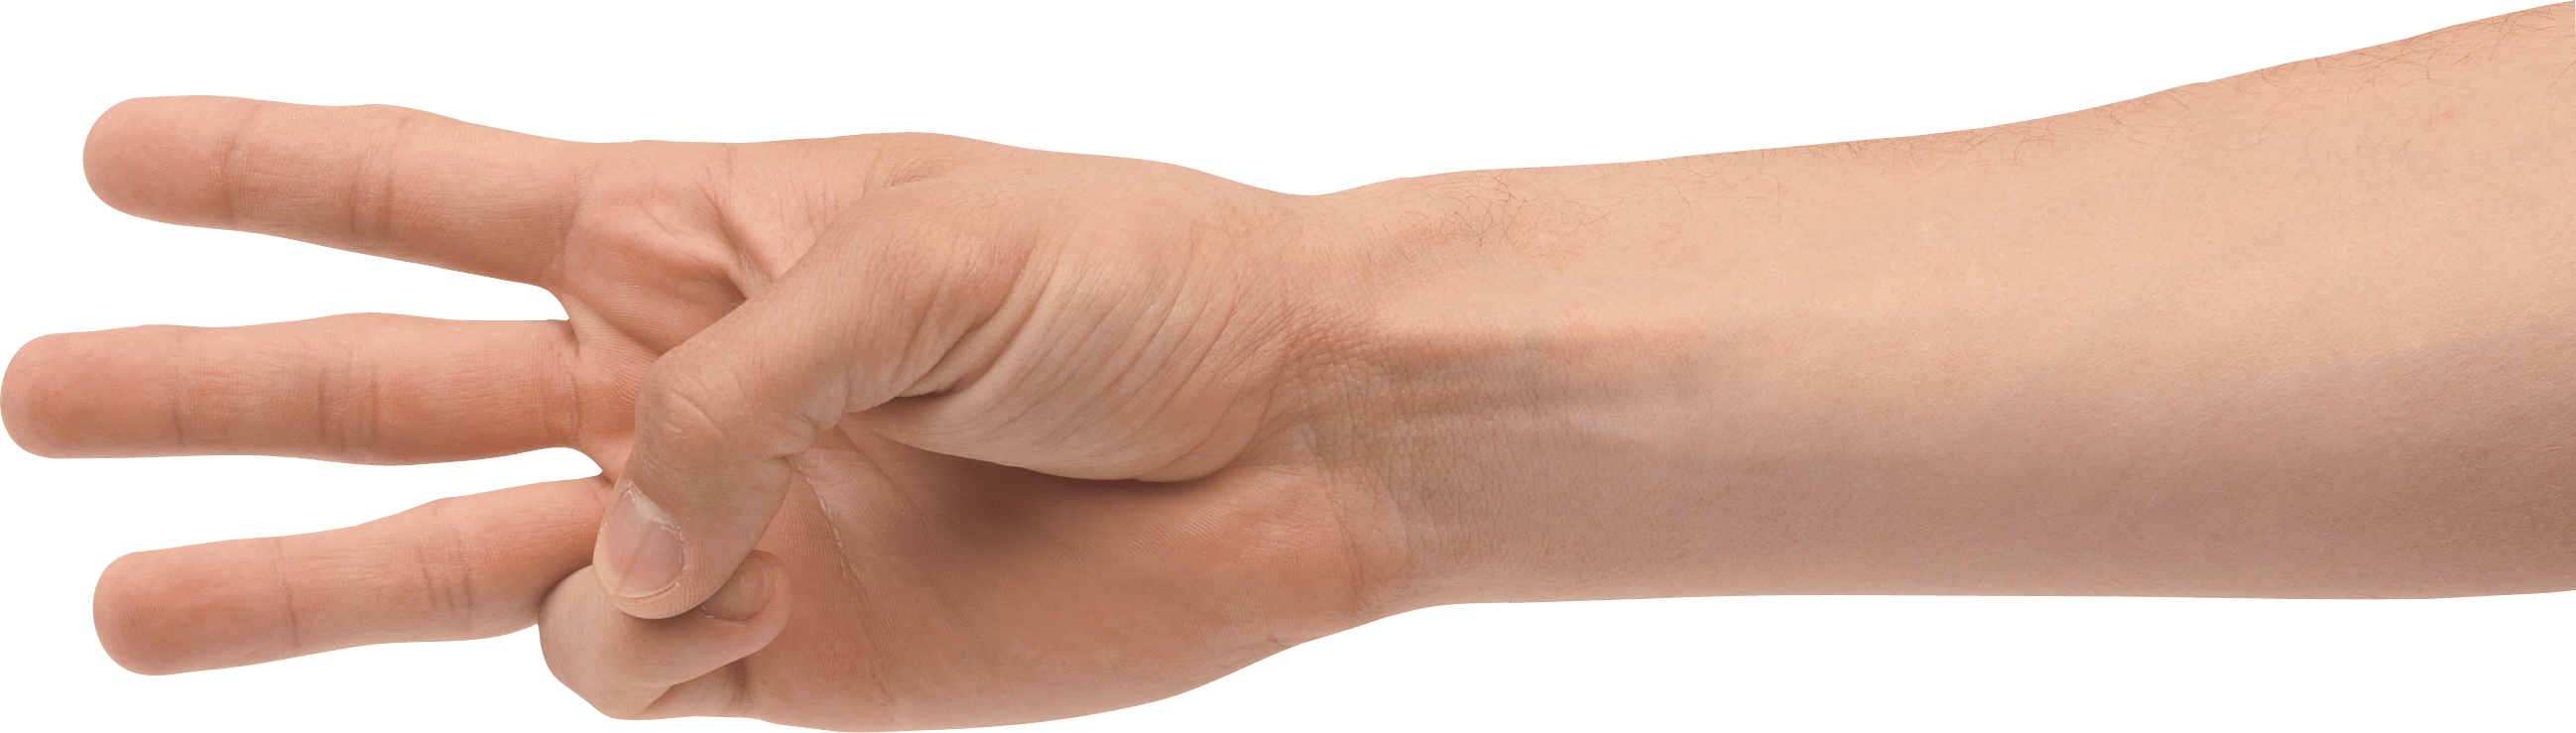 Three Fingers Png Image PNG Image